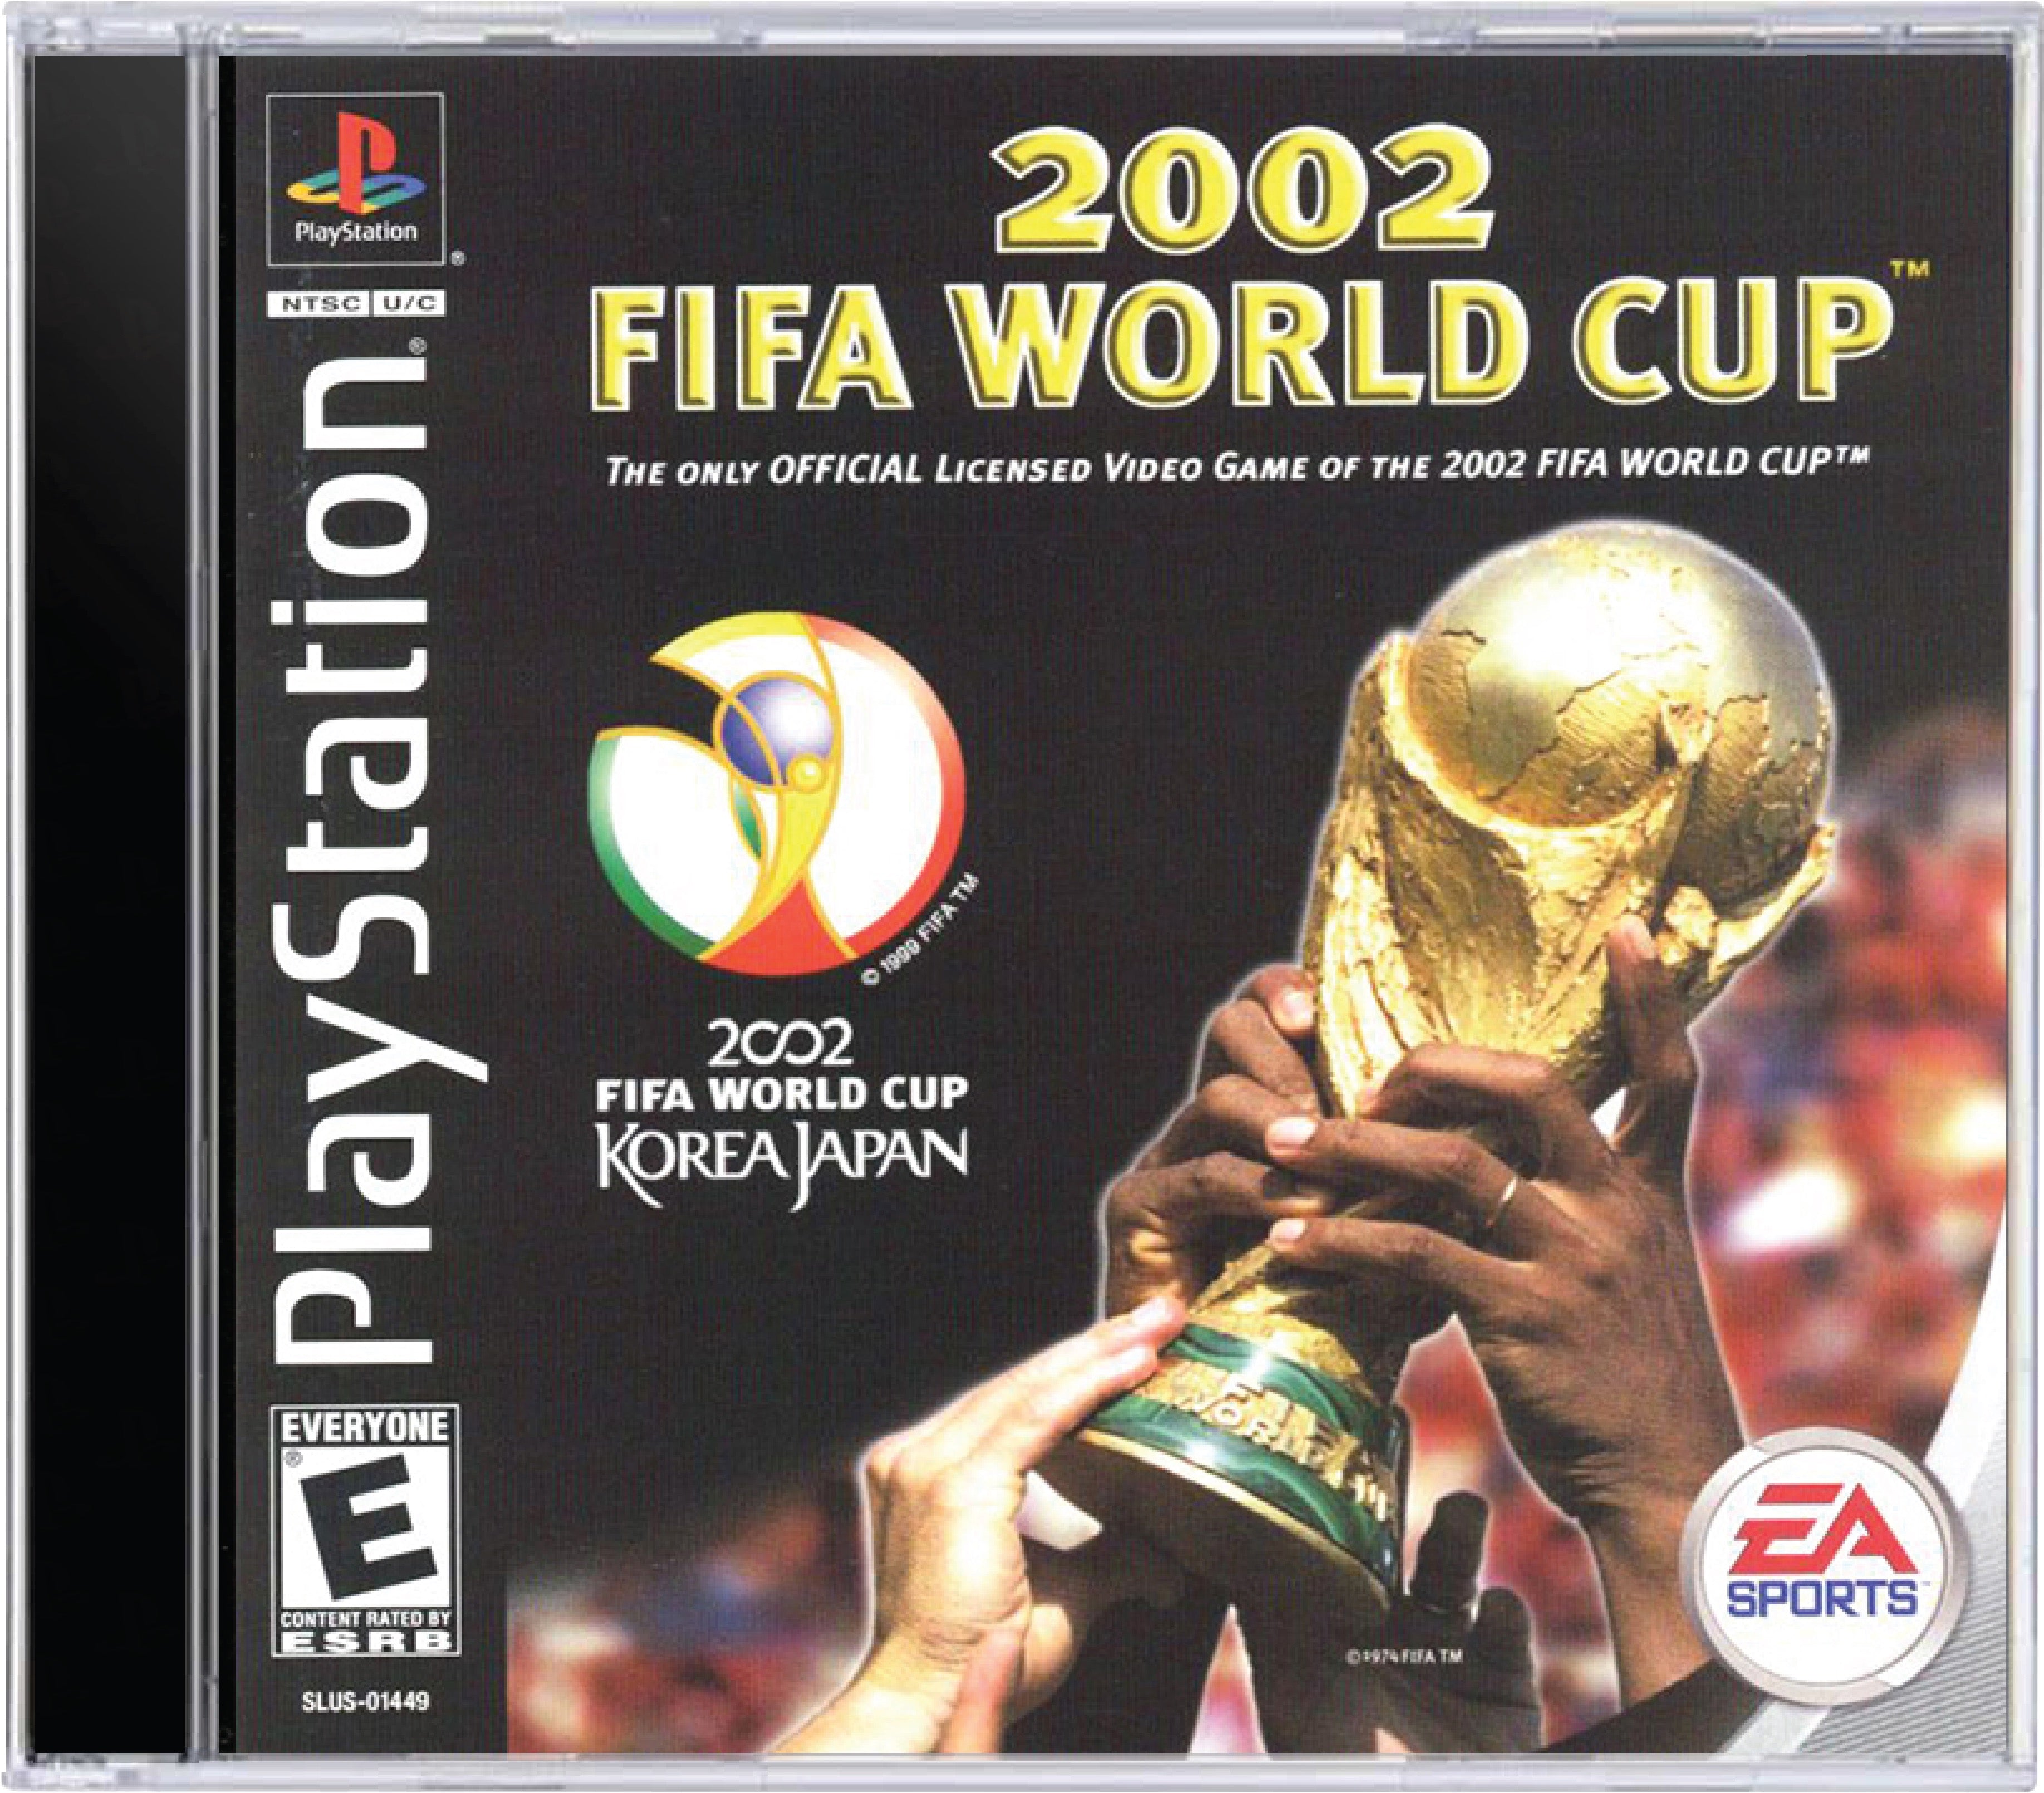 FIFA 2002 World Cup Cover Art and Product Photo